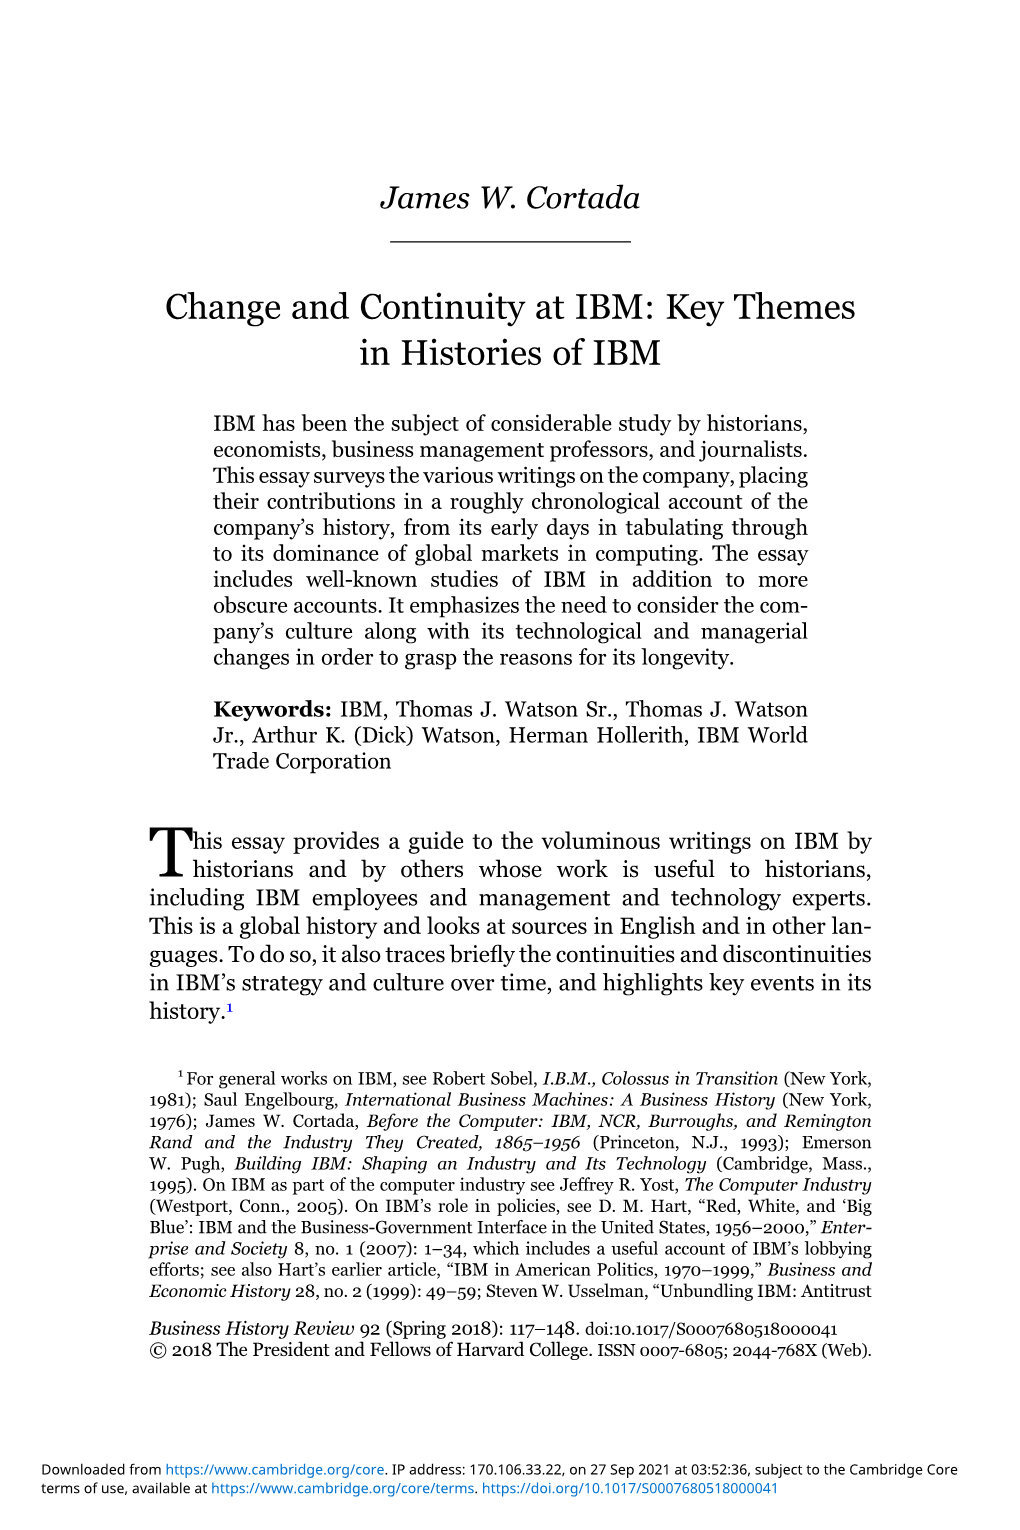 Change and Continuity at IBM: Key Themes in Histories of IBM